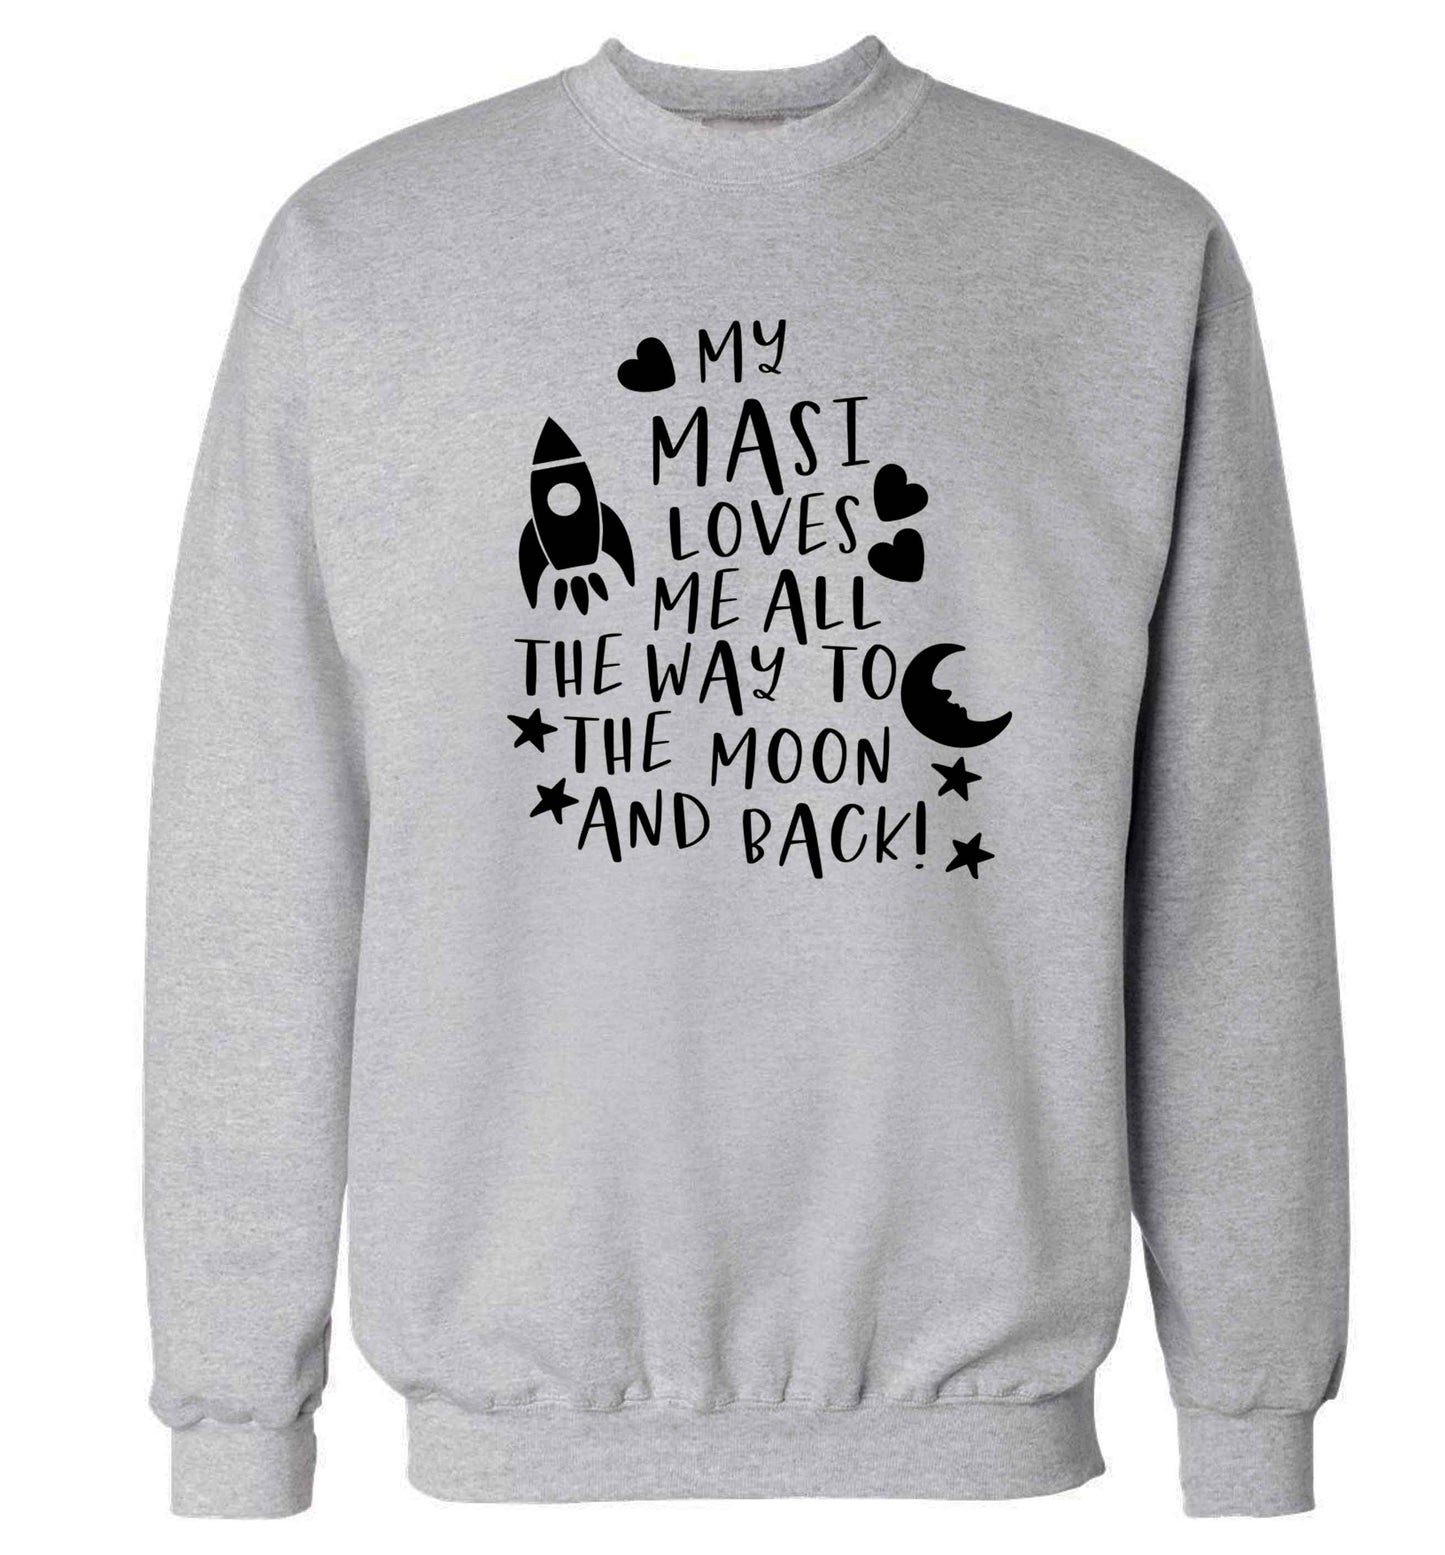 My masi loves me all the way to the moon and back Adult's unisex grey Sweater 2XL